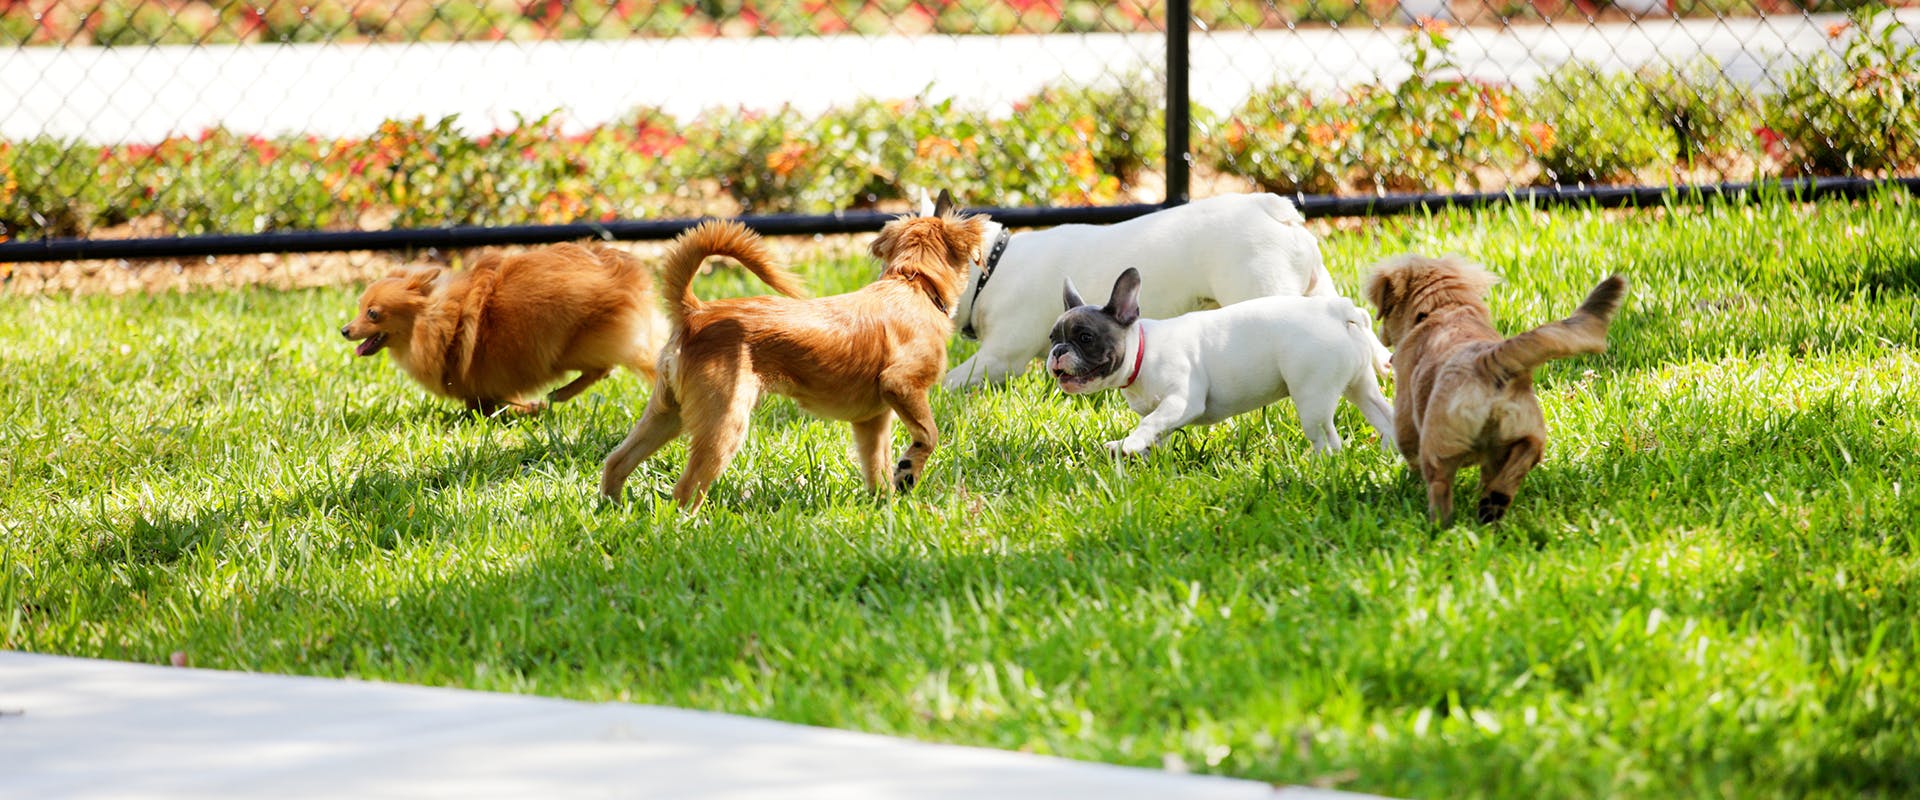 A group of dogs playing in a dog park